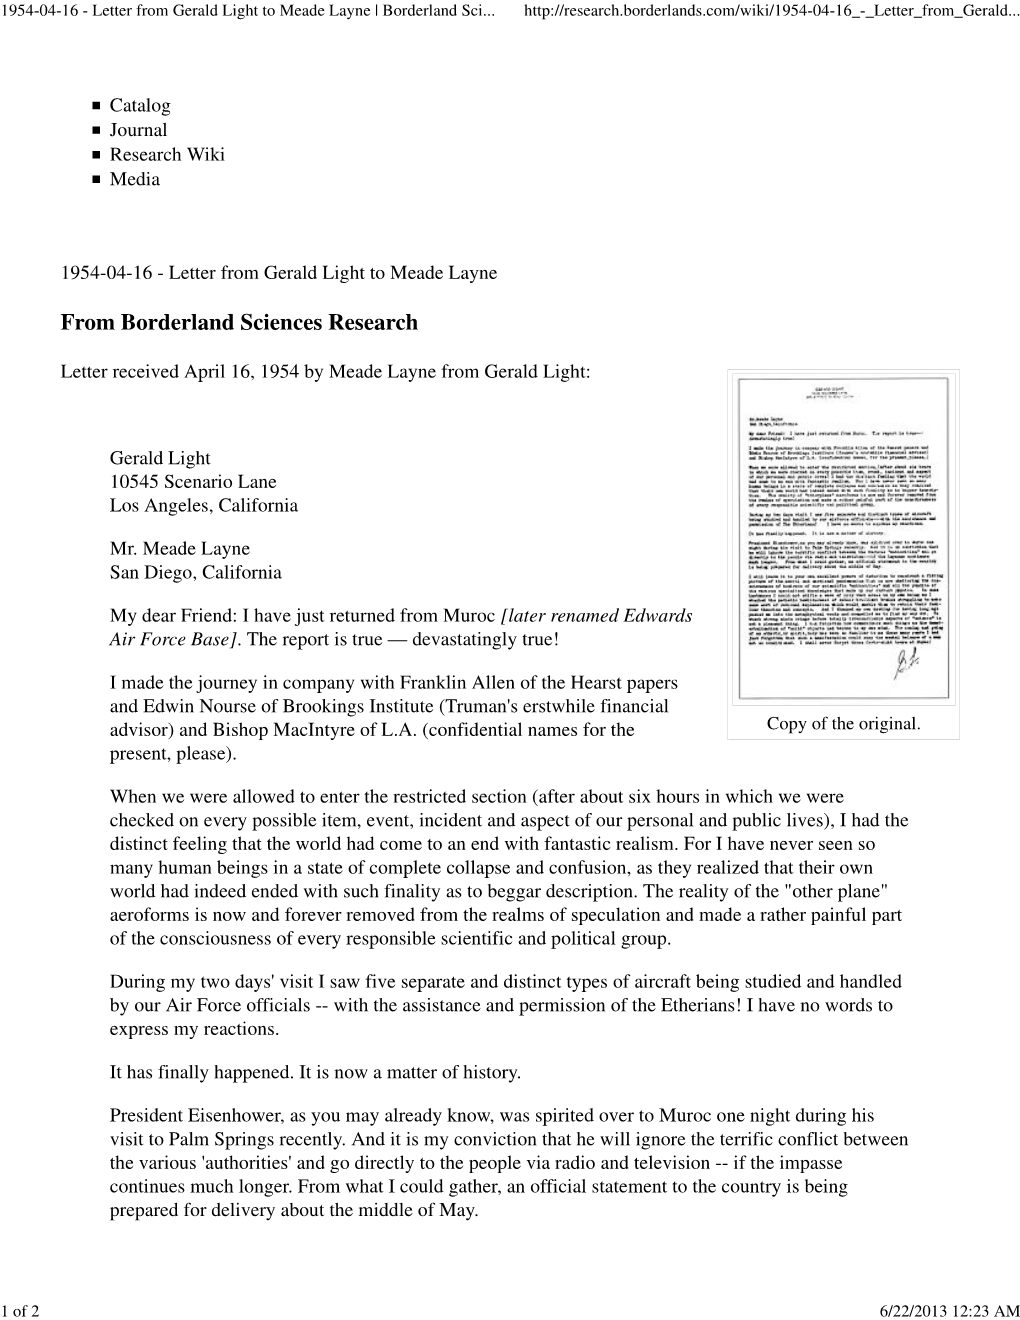 Letter from Gerald Light to Meade Layne | Borderland Sci